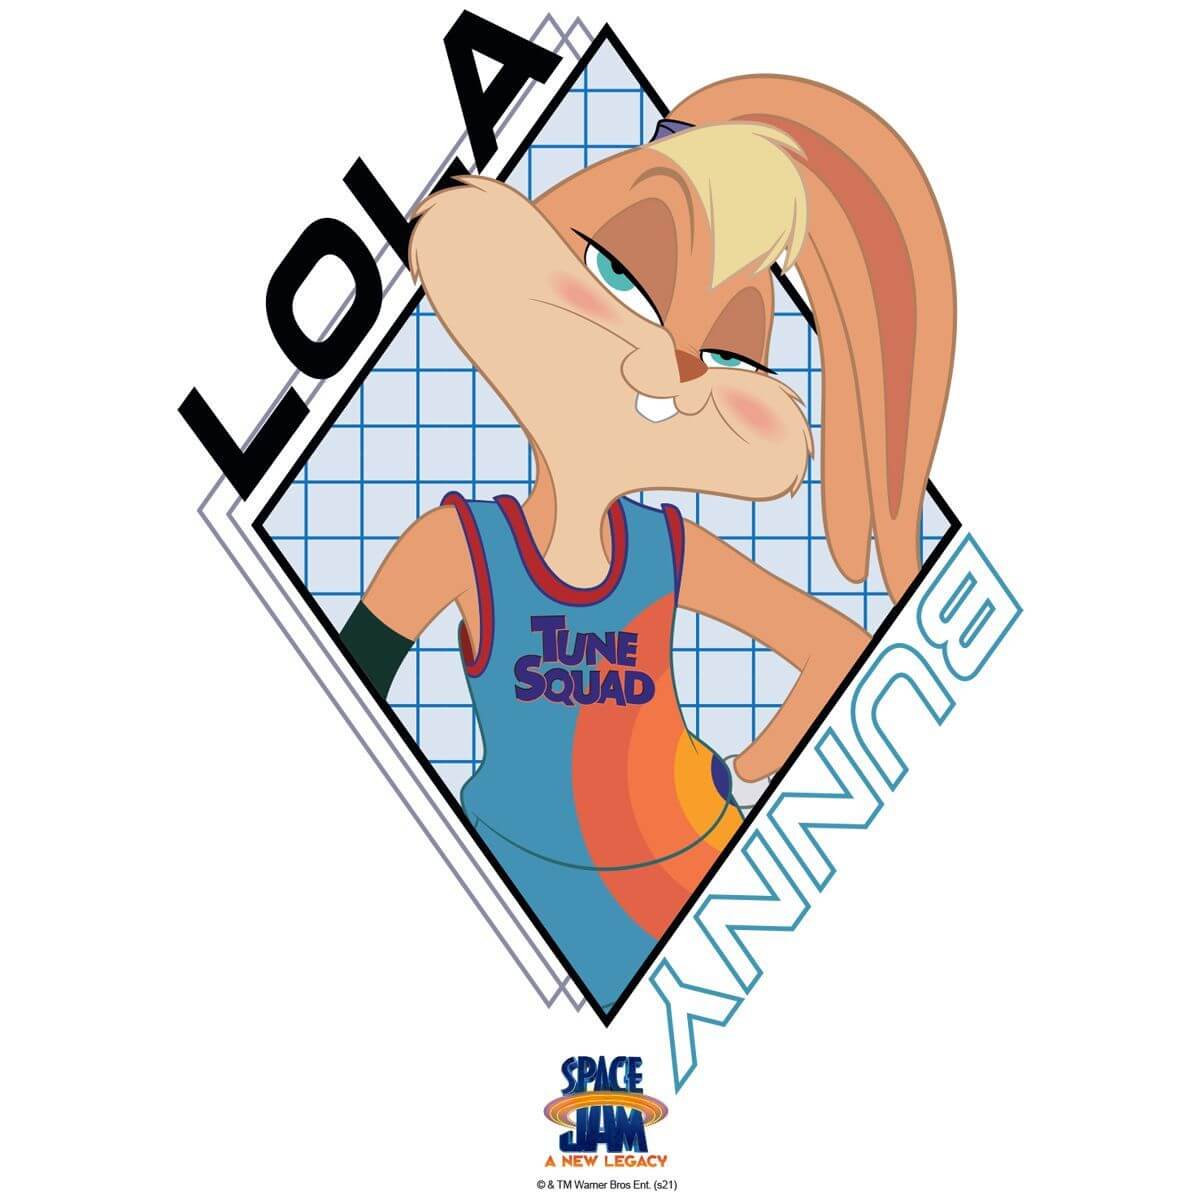 Kismet Decals Space Jam: A New Legacy Lola Bunny Licensed Wall Sticker - Easy DIY Looney Tunes Home & Room Decor - Kismet Decals